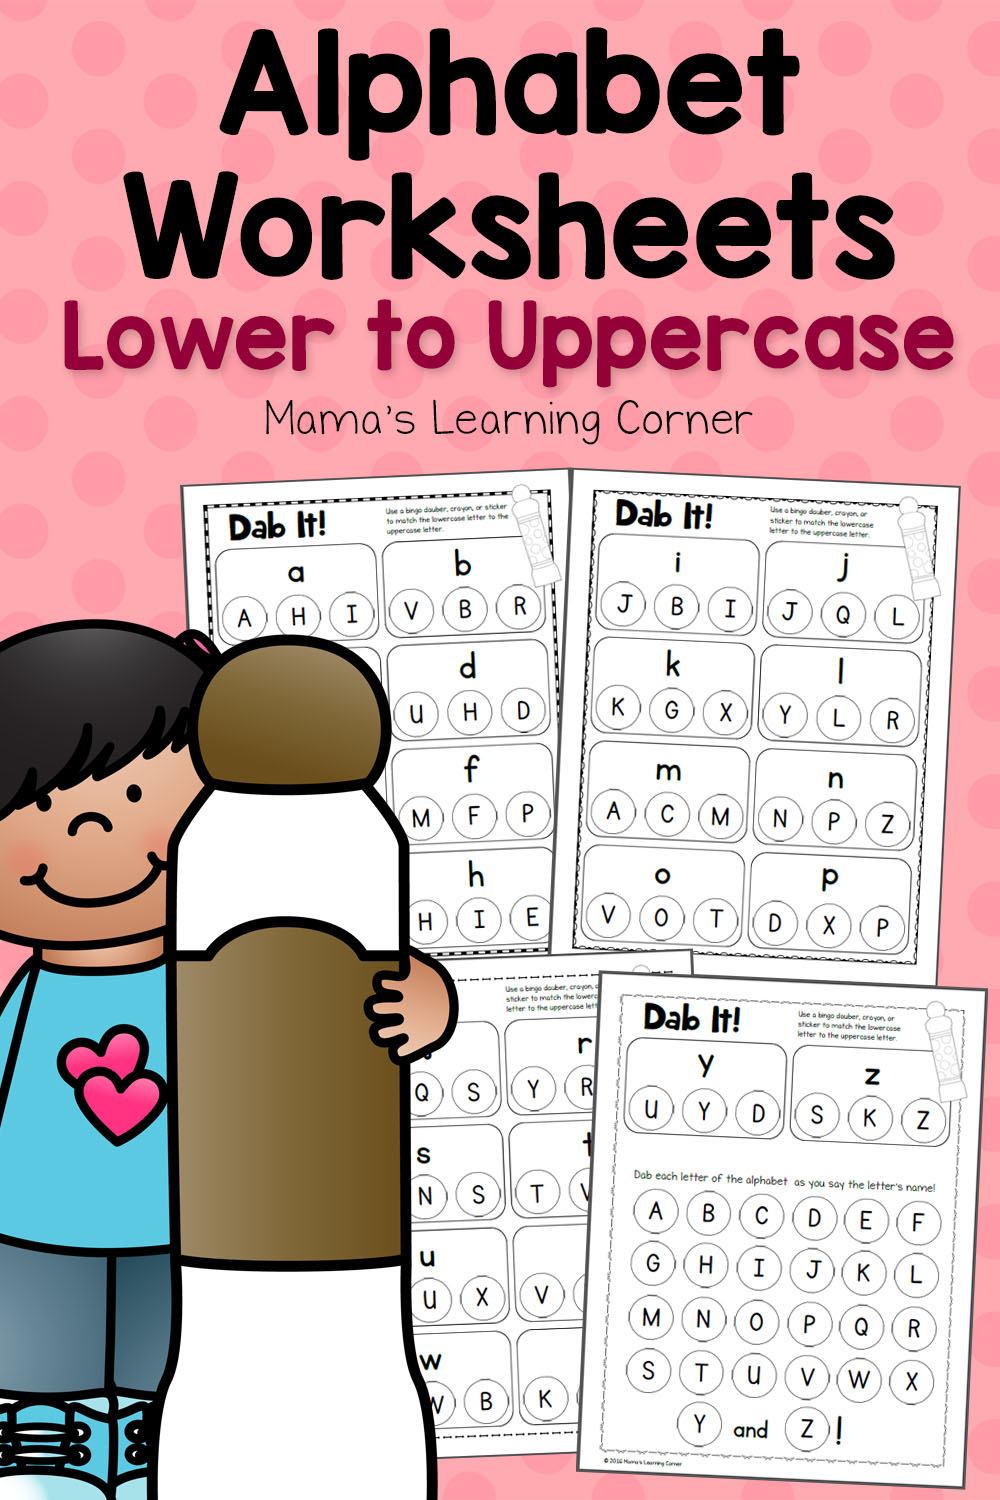 Dab It! Alphabet Worksheets: Matching Lower and Uppercase Letters